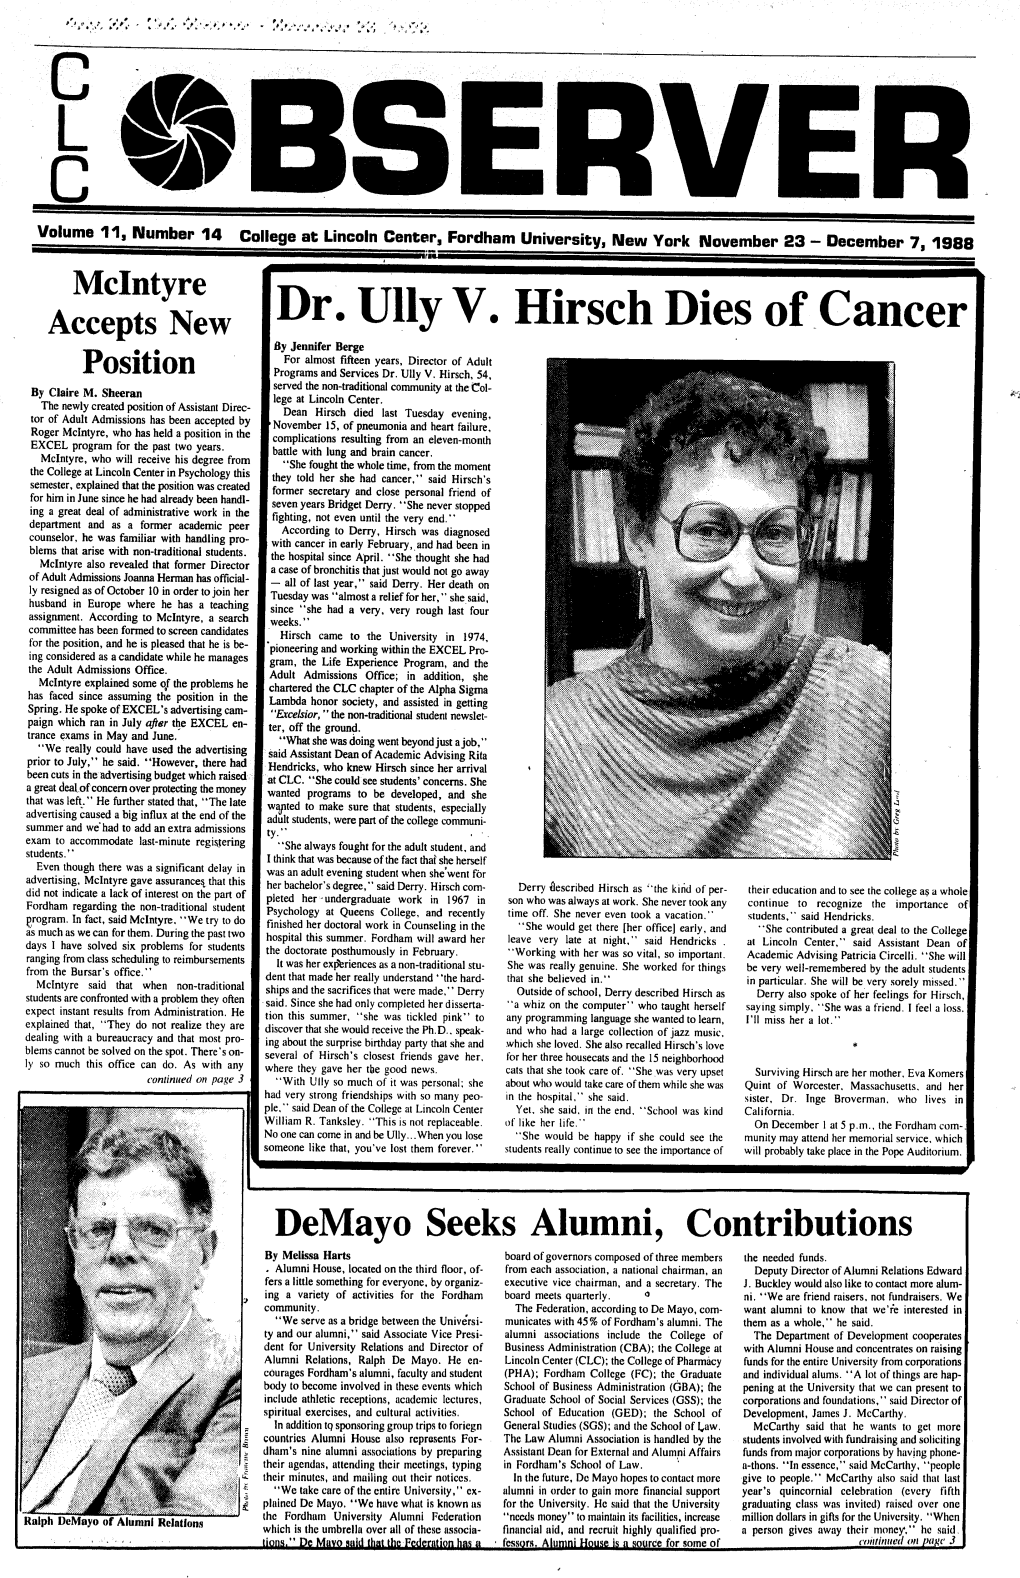 Dr. Uuy V. Hirsch Dies of Cancer | by Jennifer Berge for Almost Fifteen Years, Director of Adult Position Programs and Services Dr